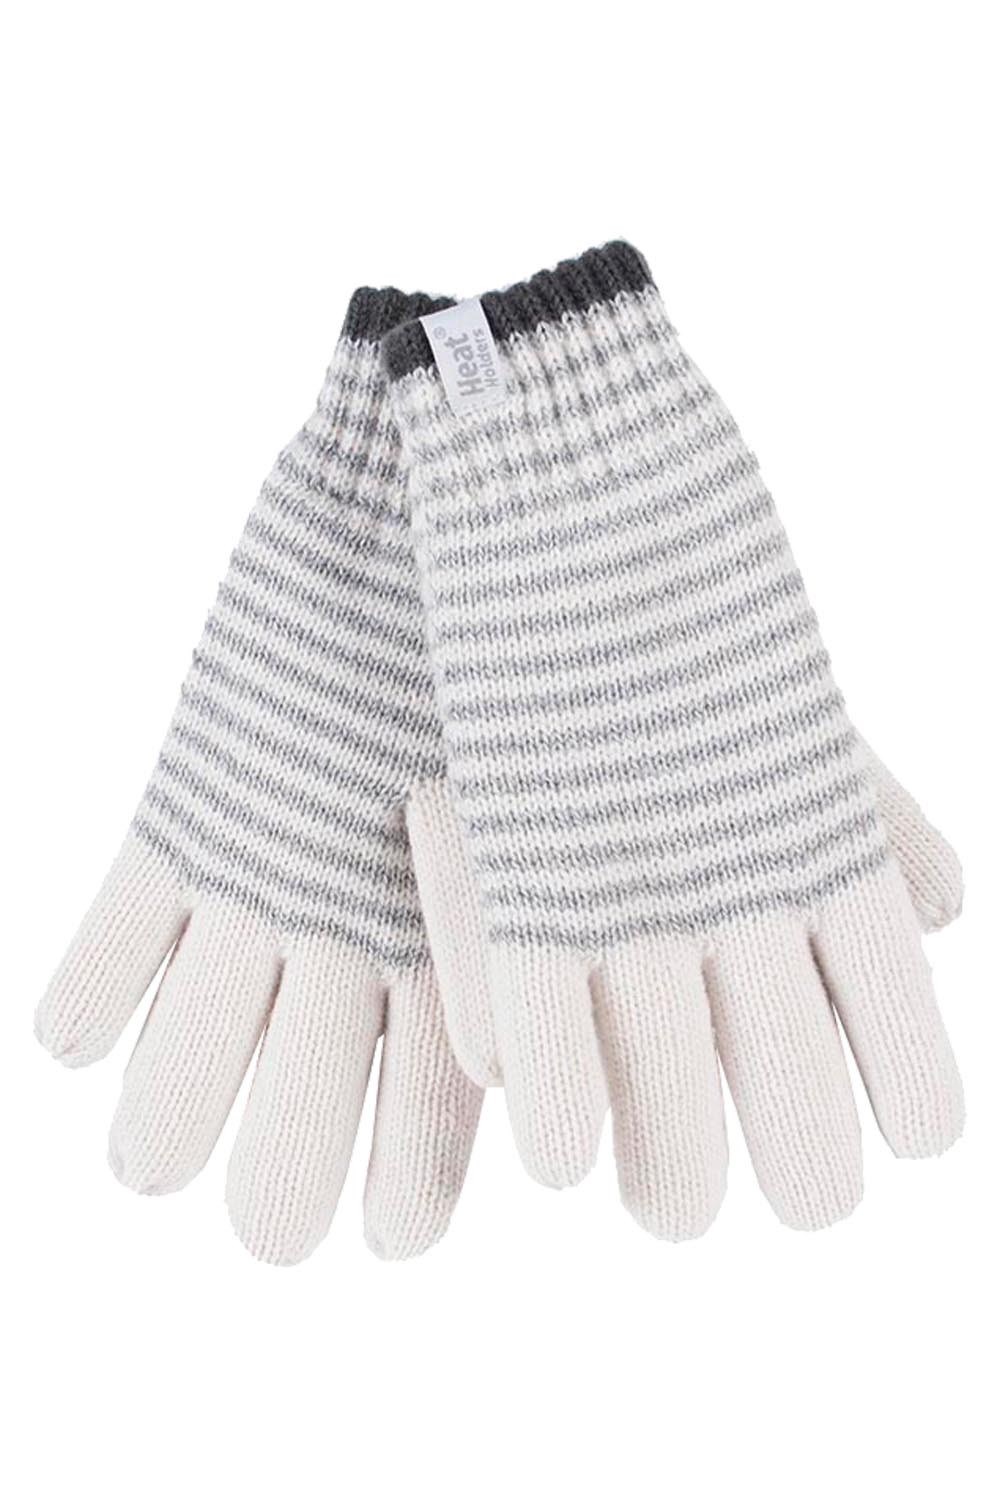 Womens Striped Thermal Gloves -